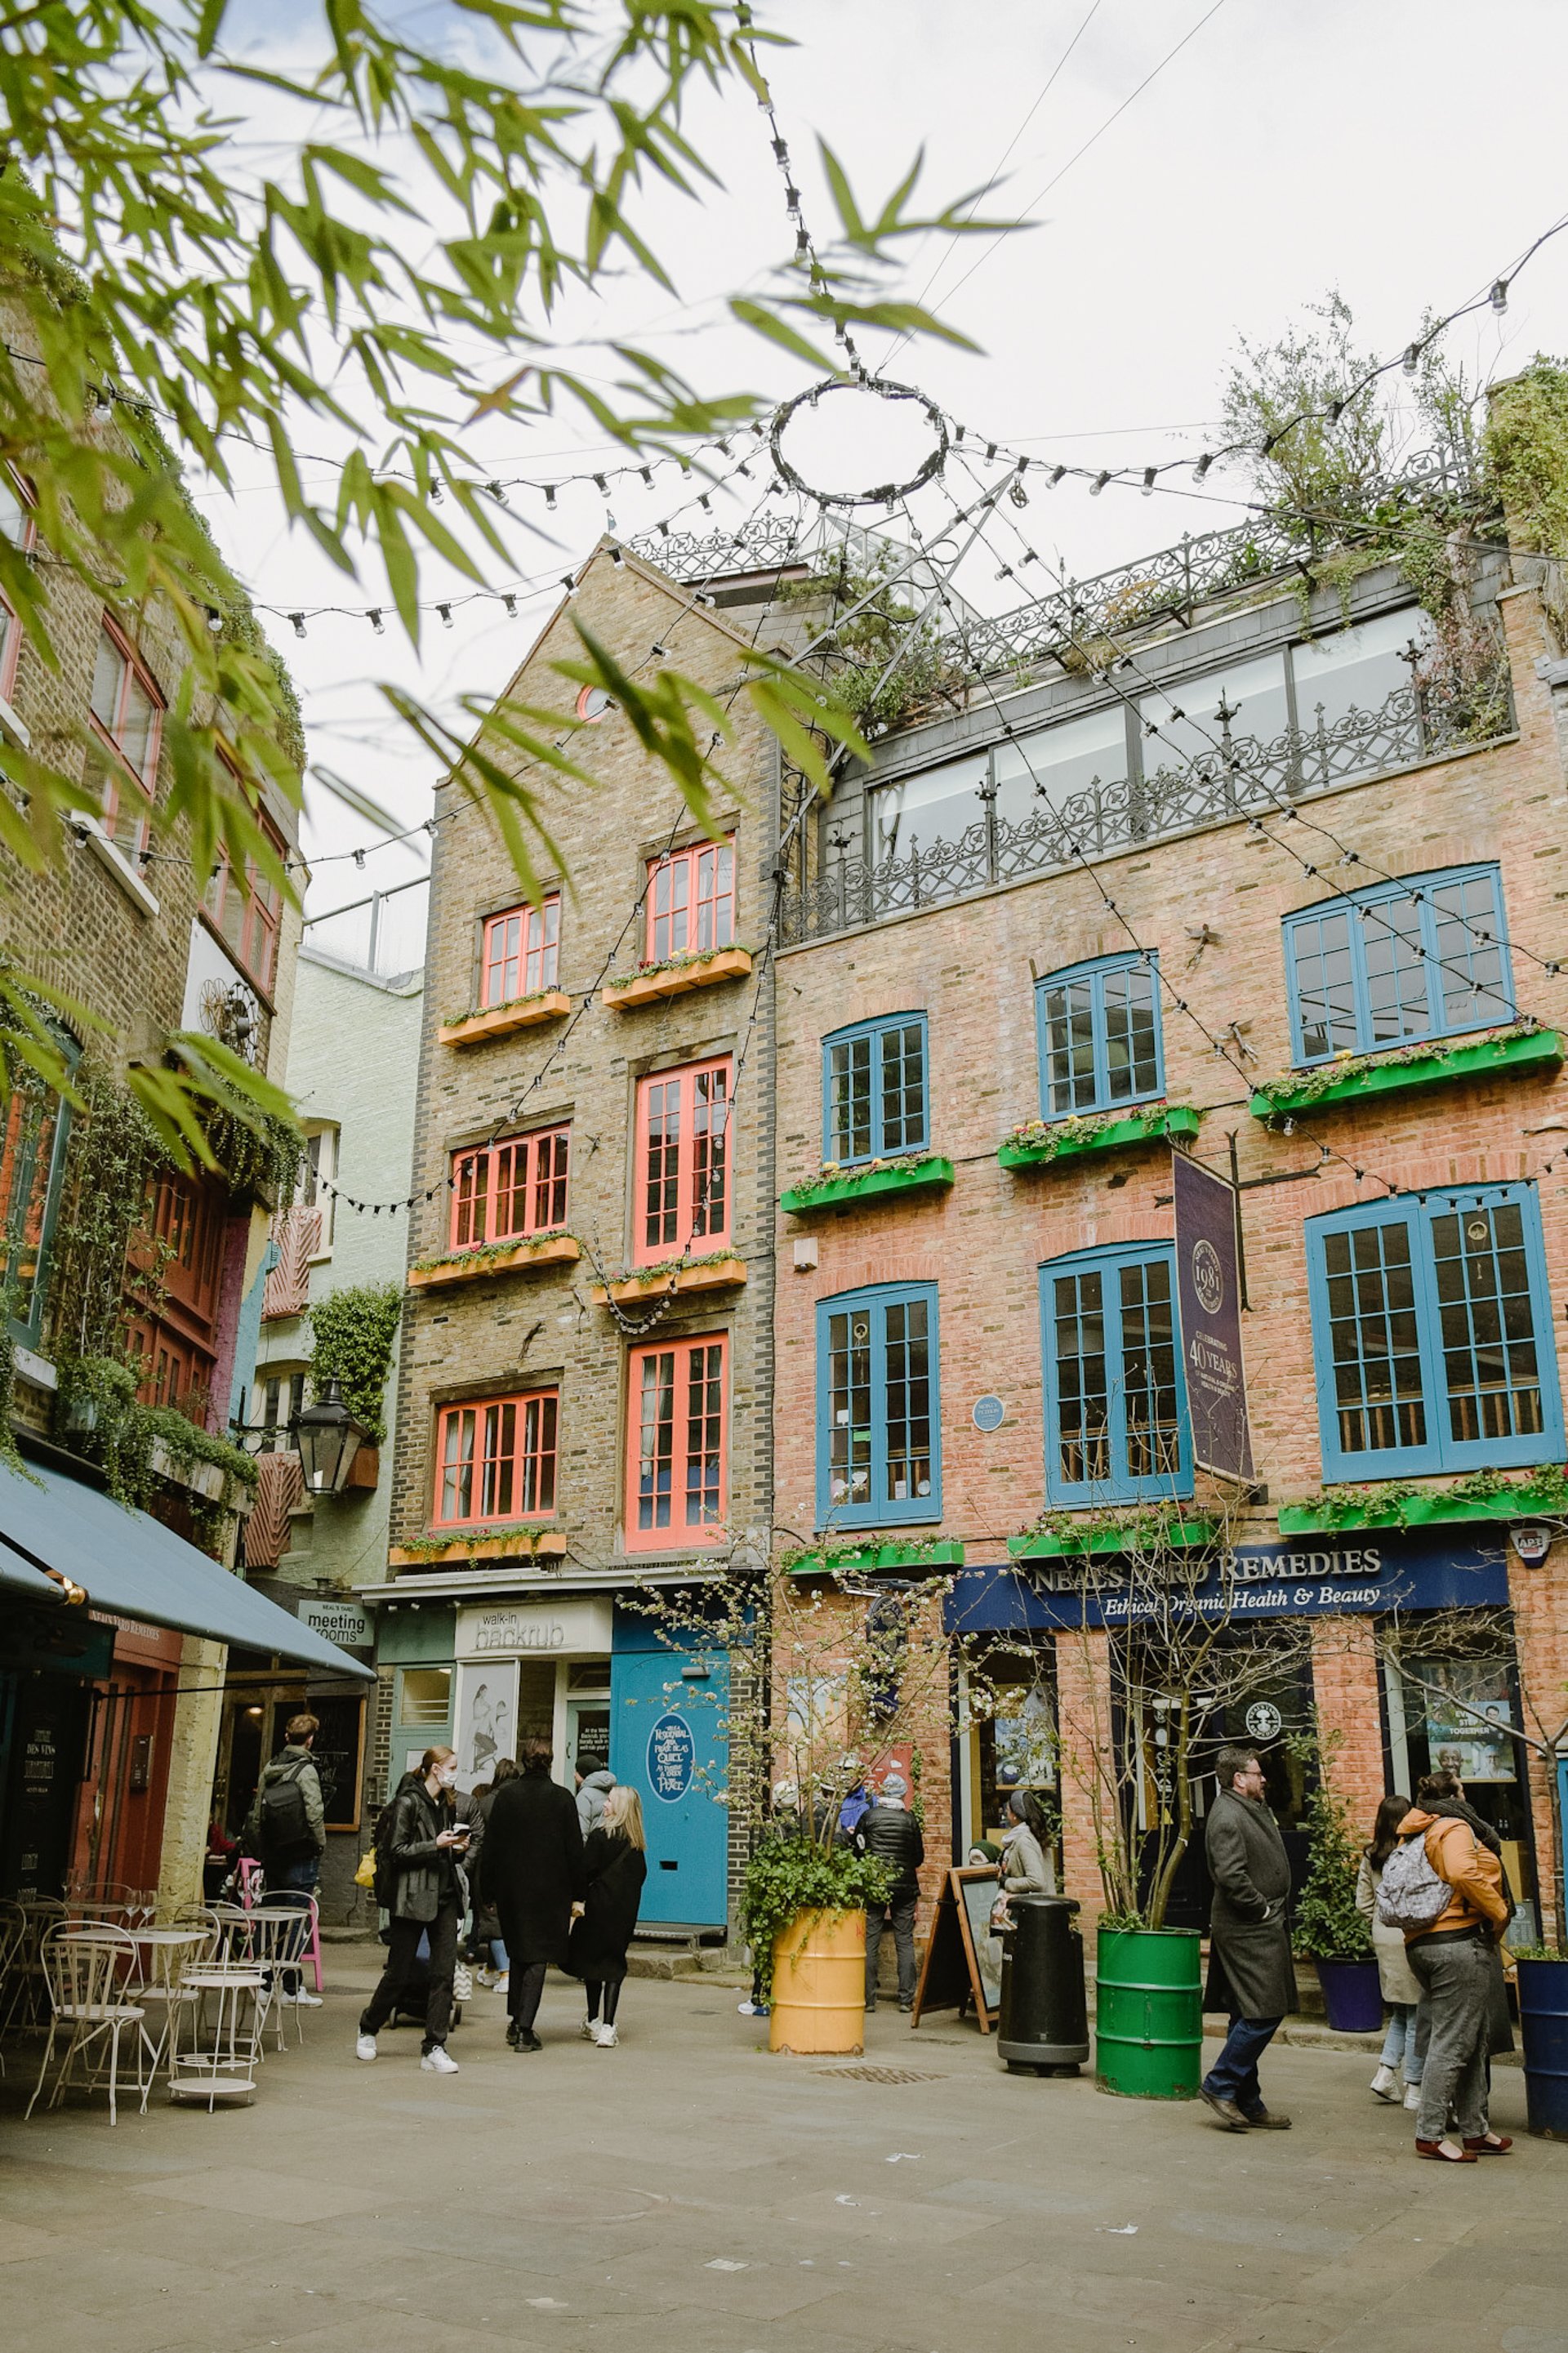 Beautiful old buildings in Neals Yard, Covent Garden, London